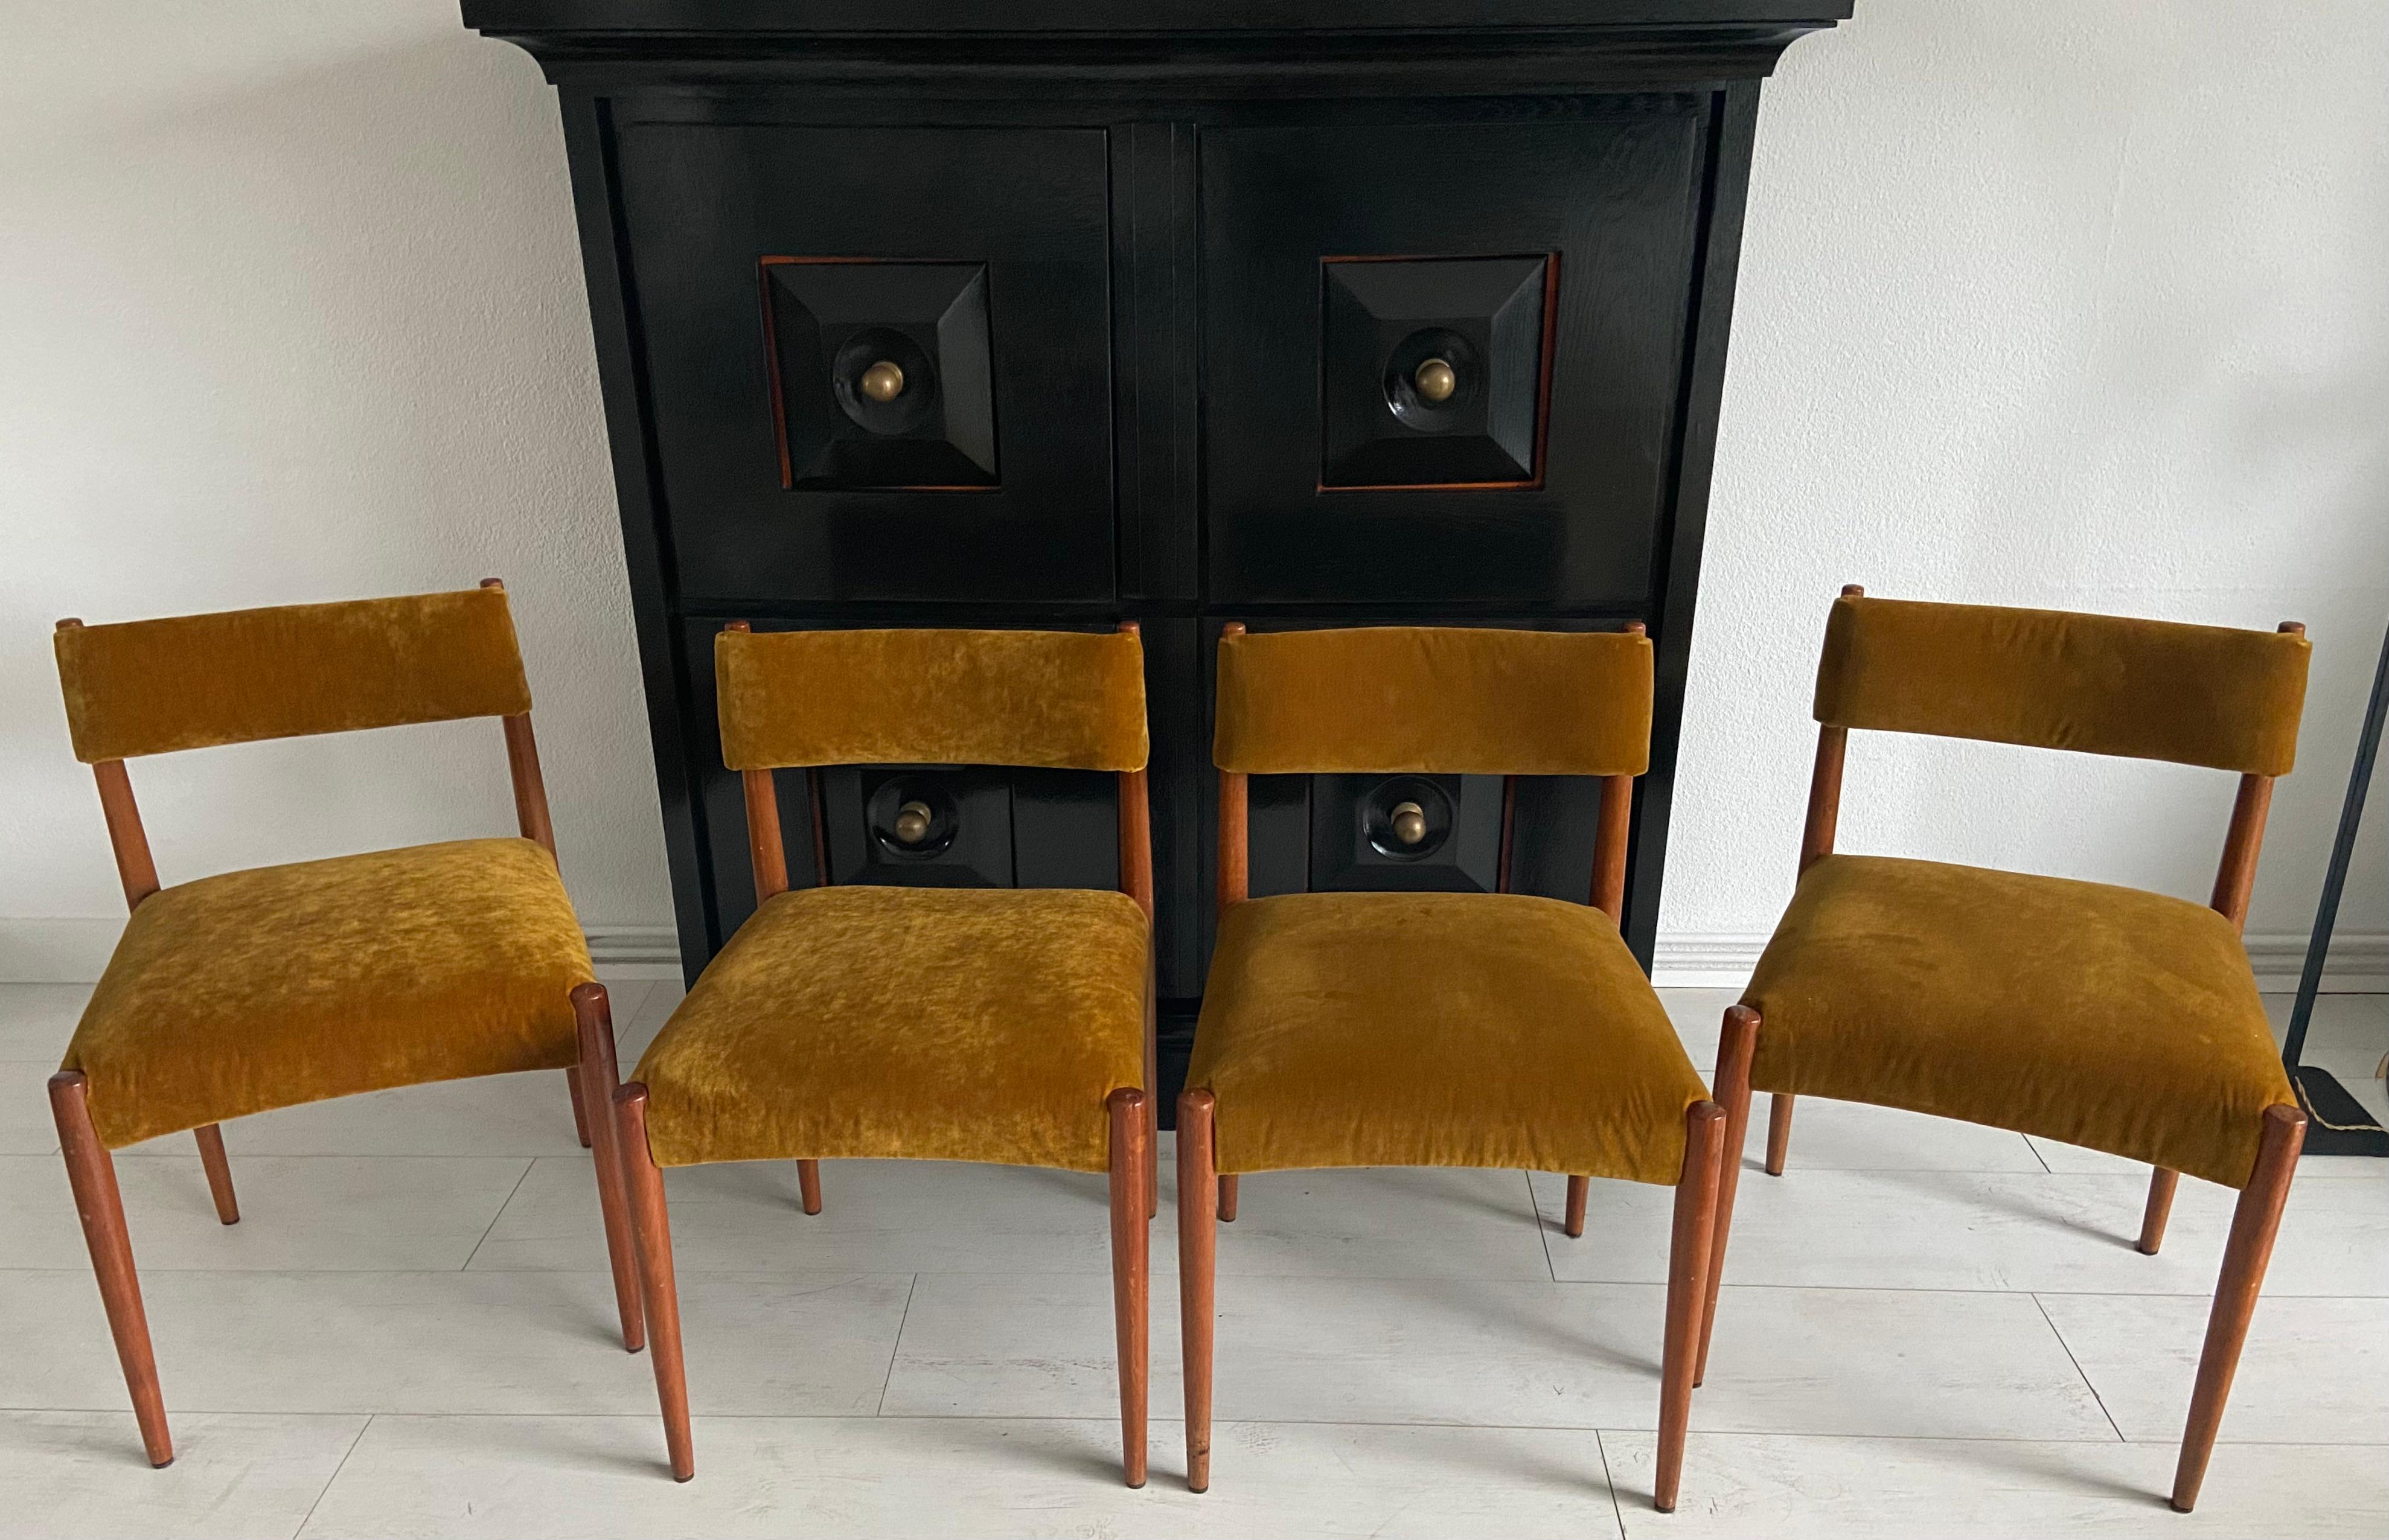 Set of 4 dining chairs by Danish designer Aksel Bender Madsen for
Bovenkamp (Netherlands), 60ties. In a good condition.
Recently reupholstered. Fabric: Gáston y Daniela.
H: 78 cm W: 45 cm. D: 48 cm.